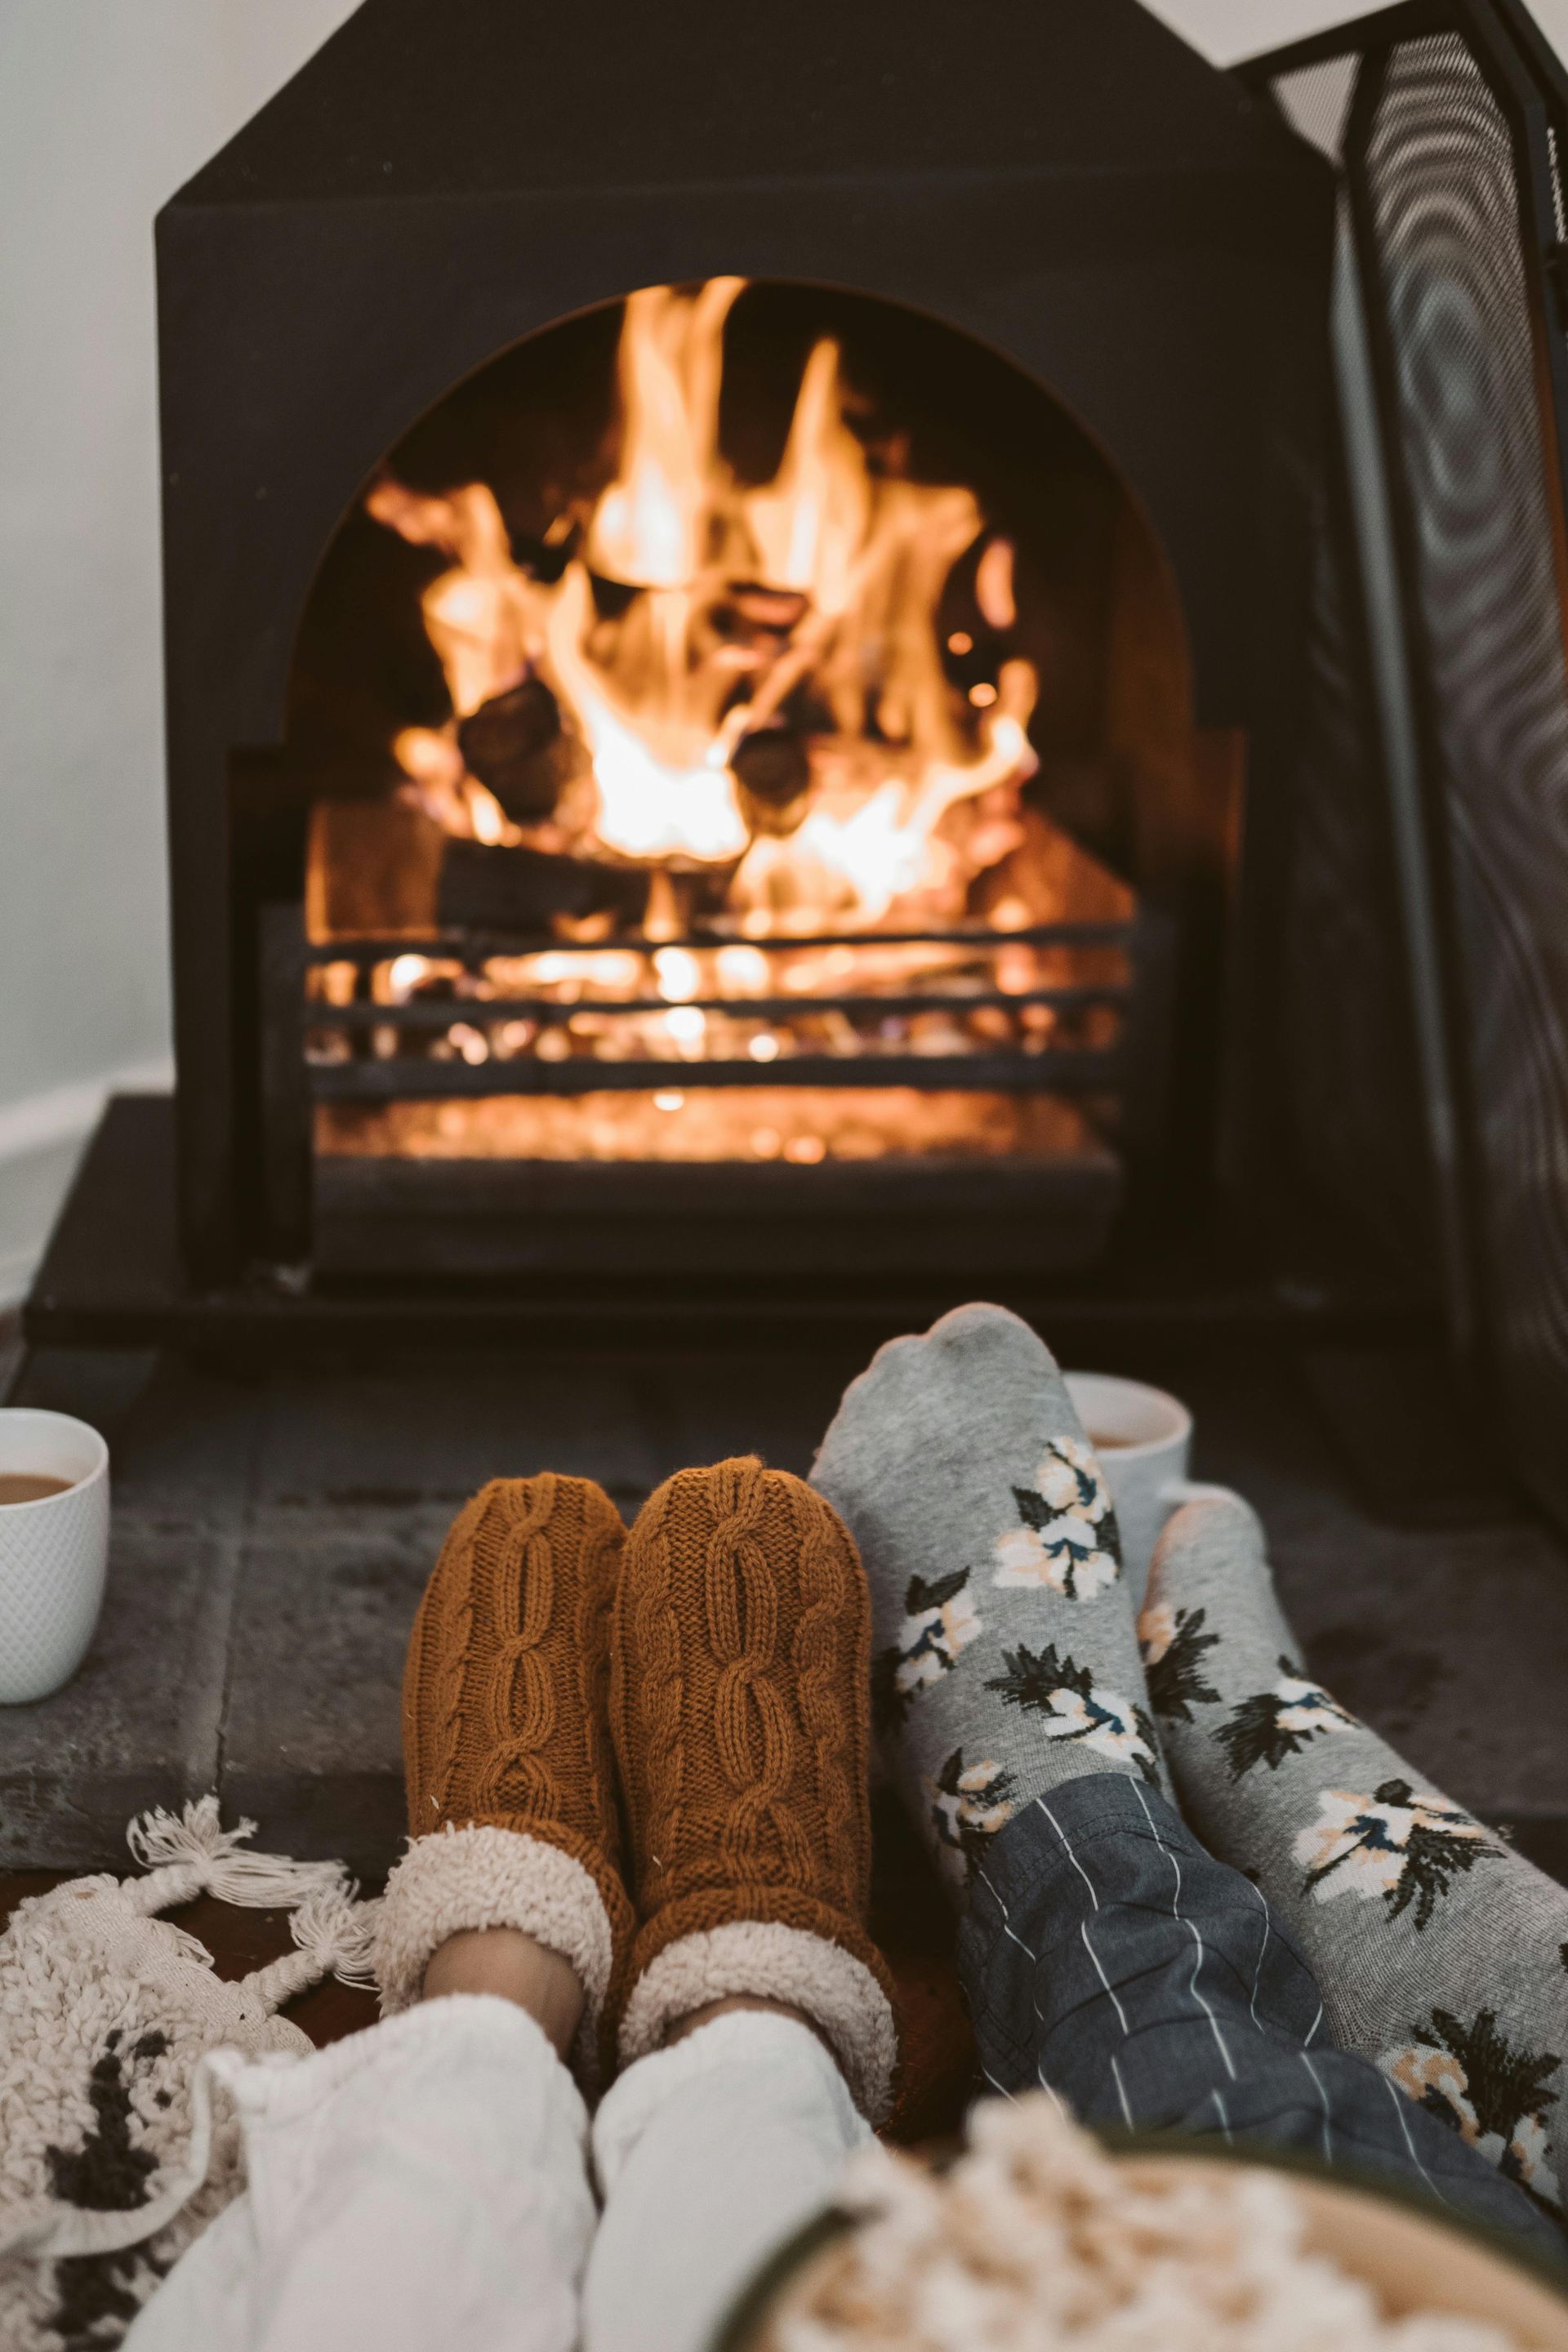 Two people are warming their feet in thick wool socks by the fire.